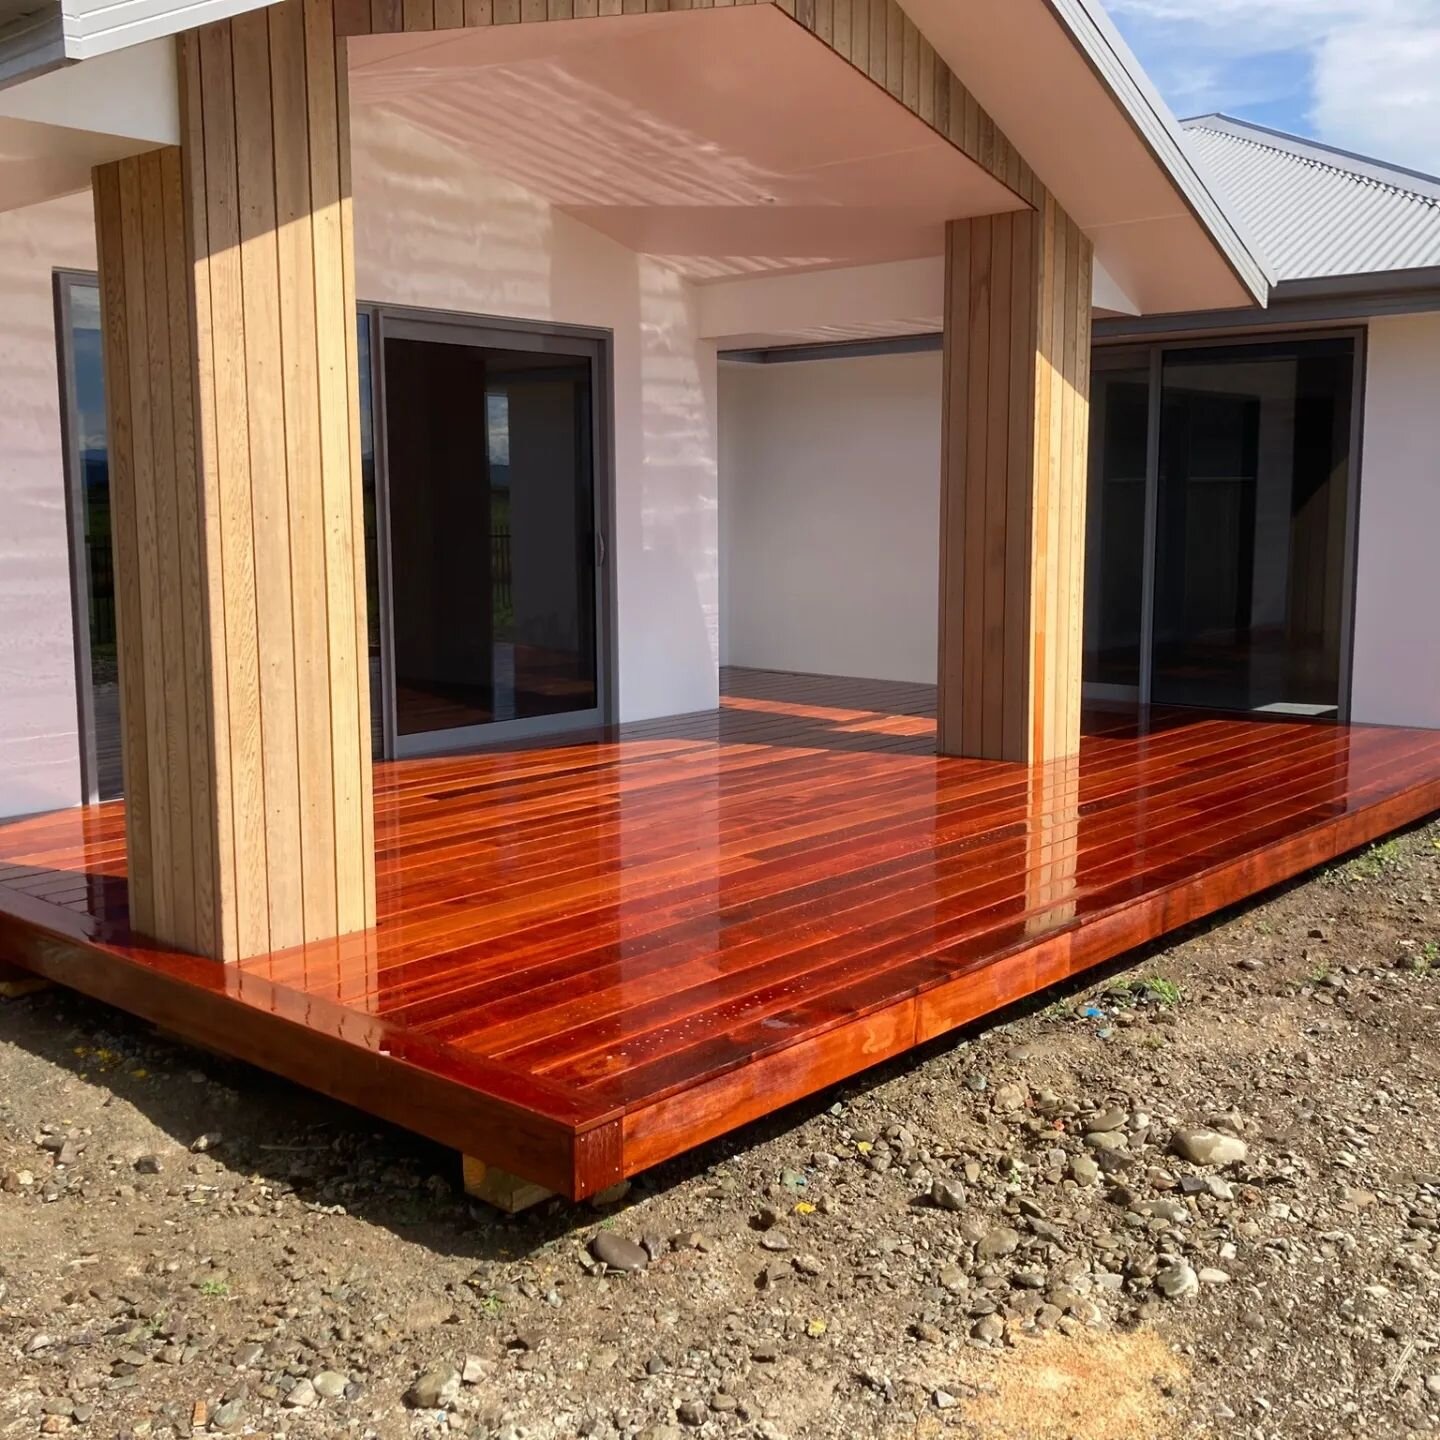 Ready to go! It's always great to get the new homes done ✔️ 

#decks4u #decksbydesign #nzsmallbusiness #newbuild #freequotes #getoutside #outdoorliving